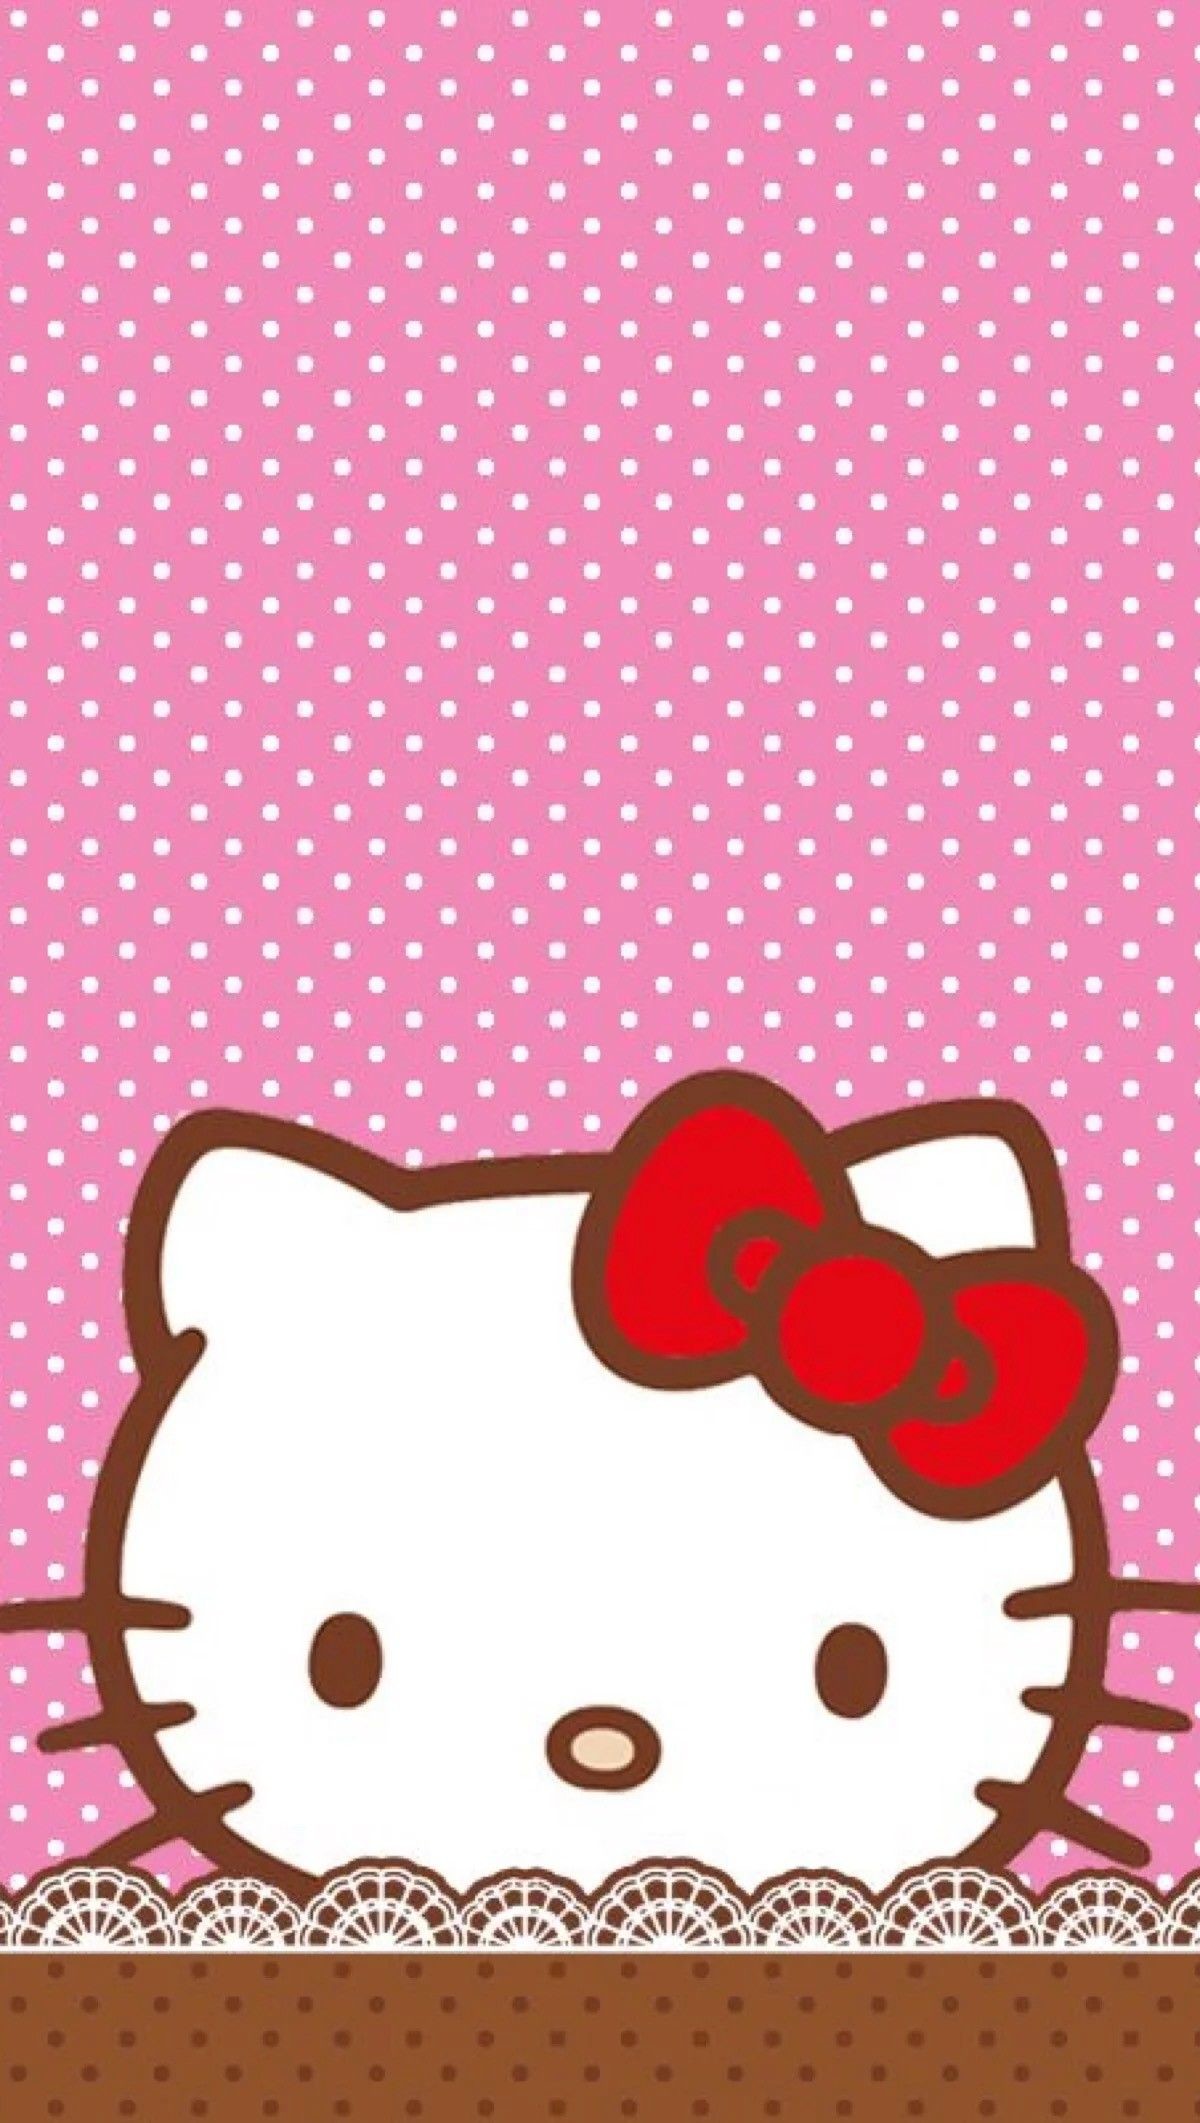 1200x2123 750x1334 Cute Hello Kitty Wallpaper for iPhone 6s | HD Wallpapers ...">